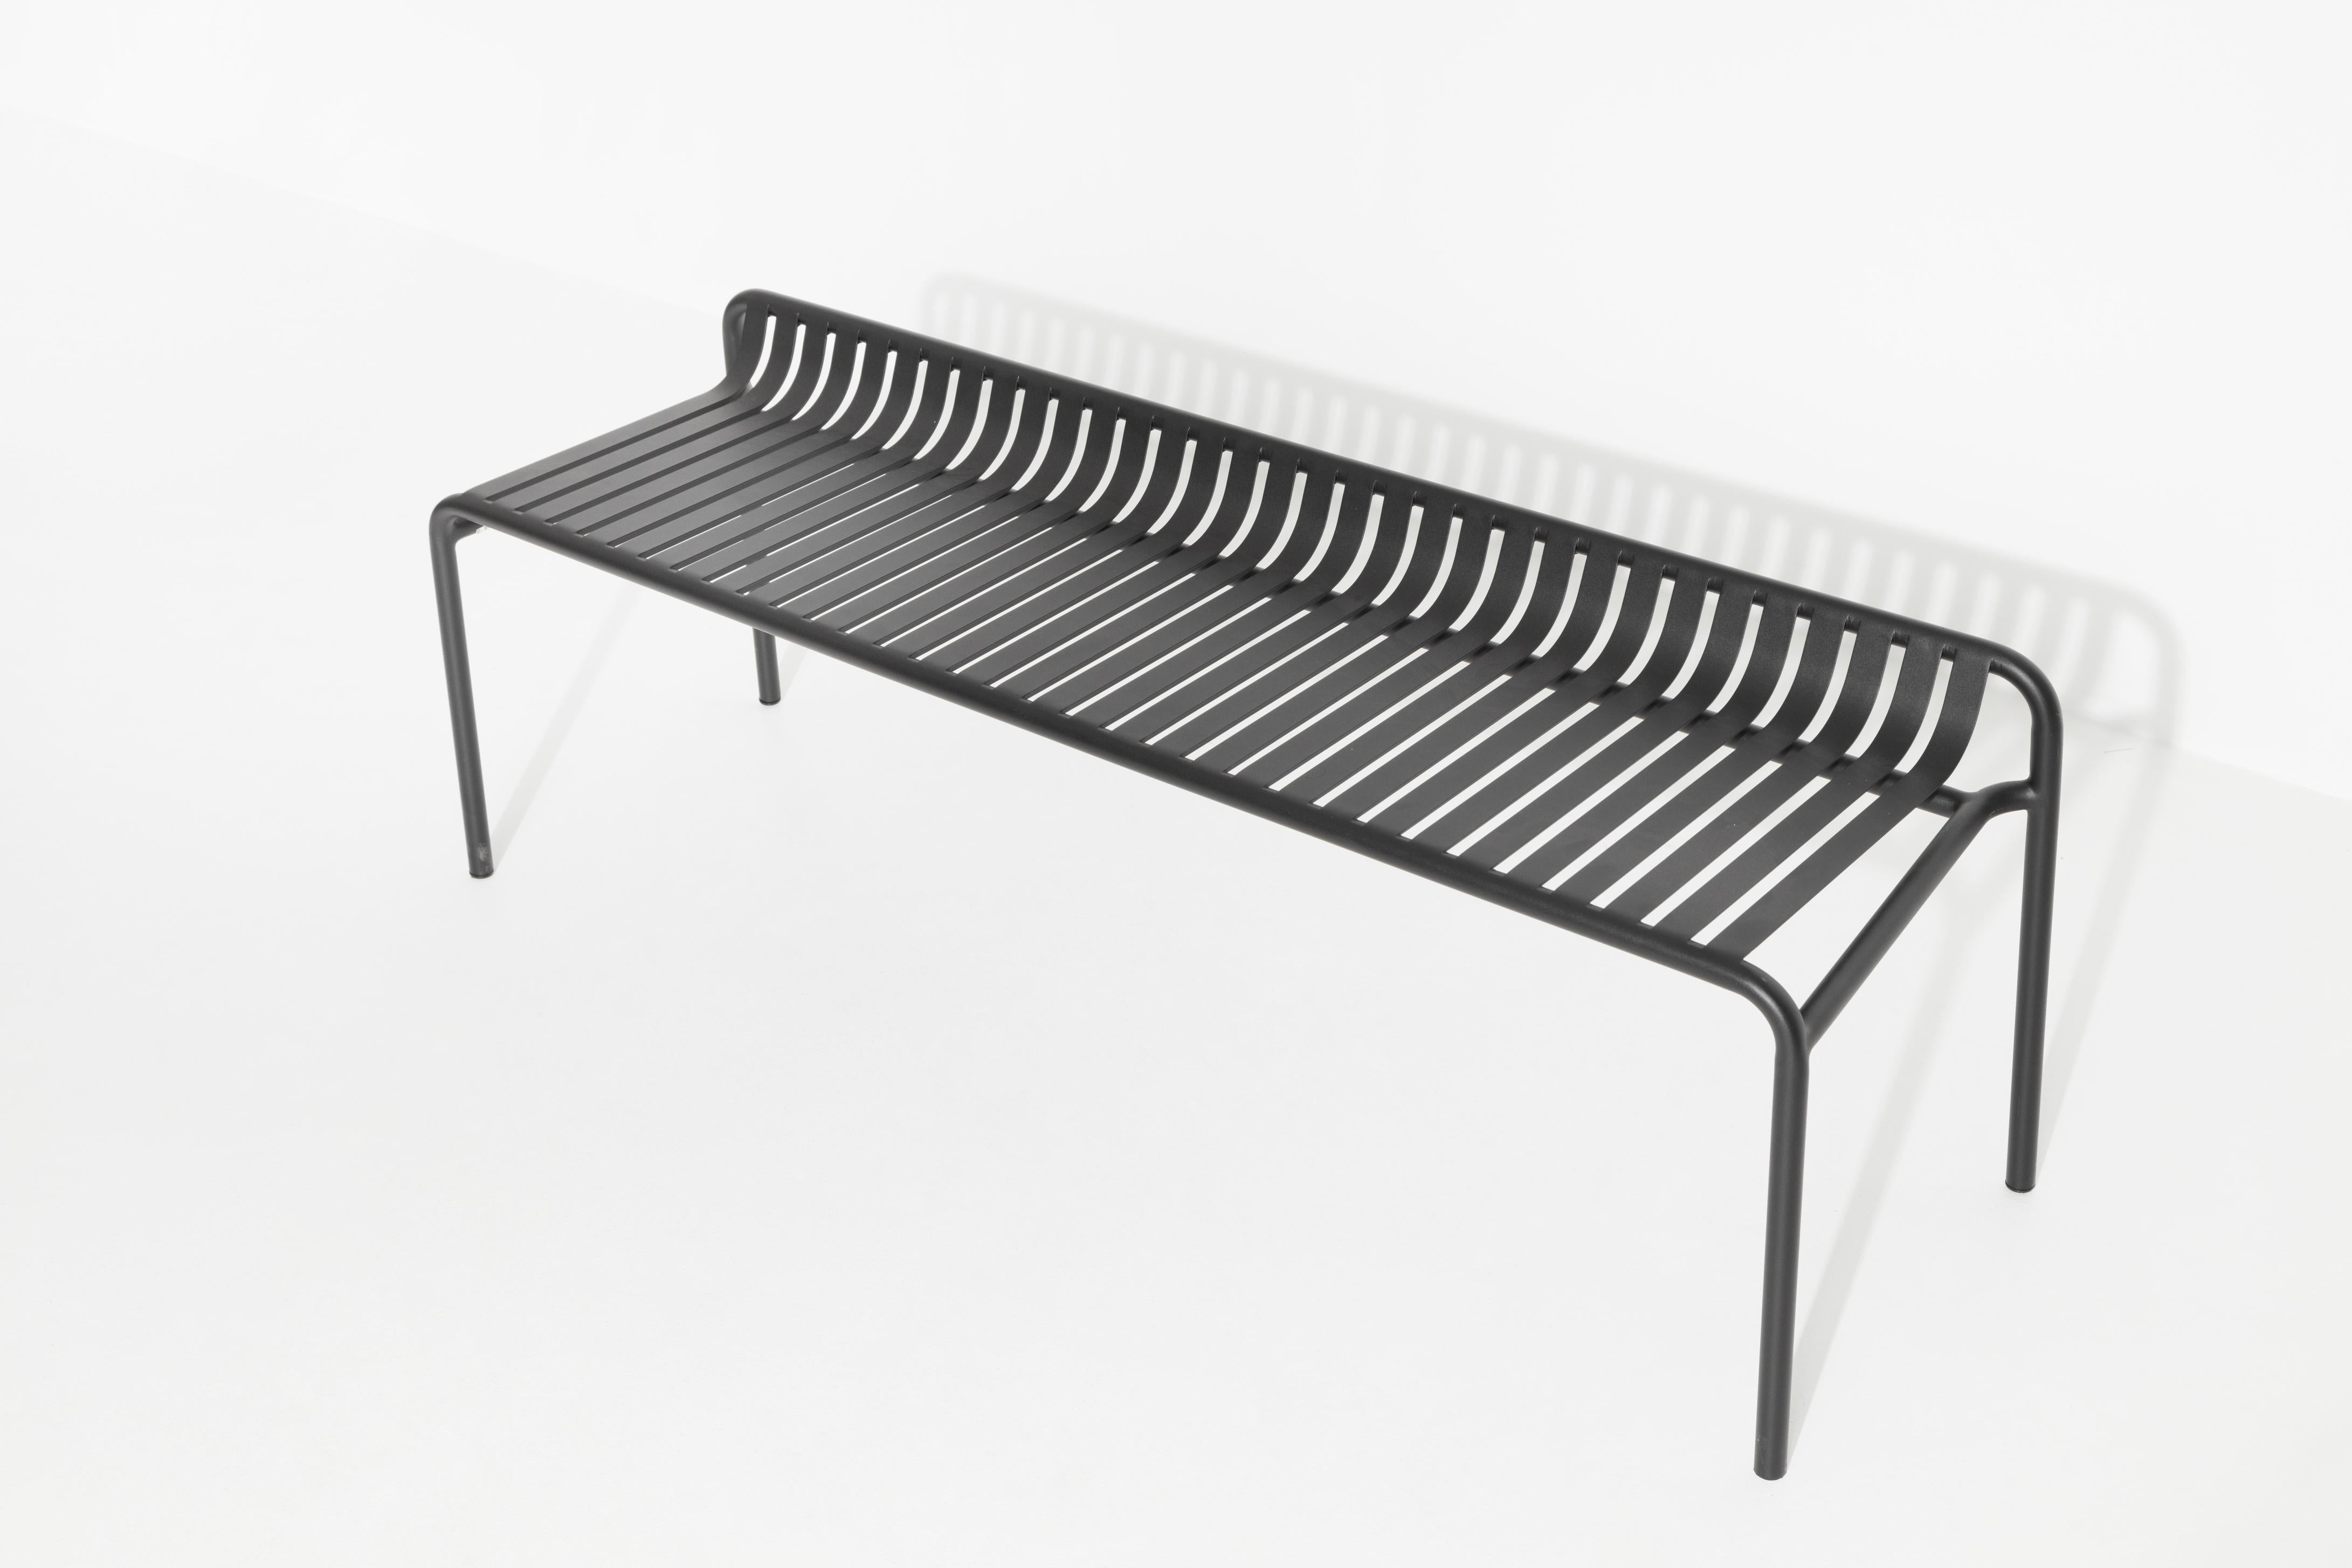 Aluminum Petite Friture Week-End Bench without Back in Black Aluminium, 2017  For Sale